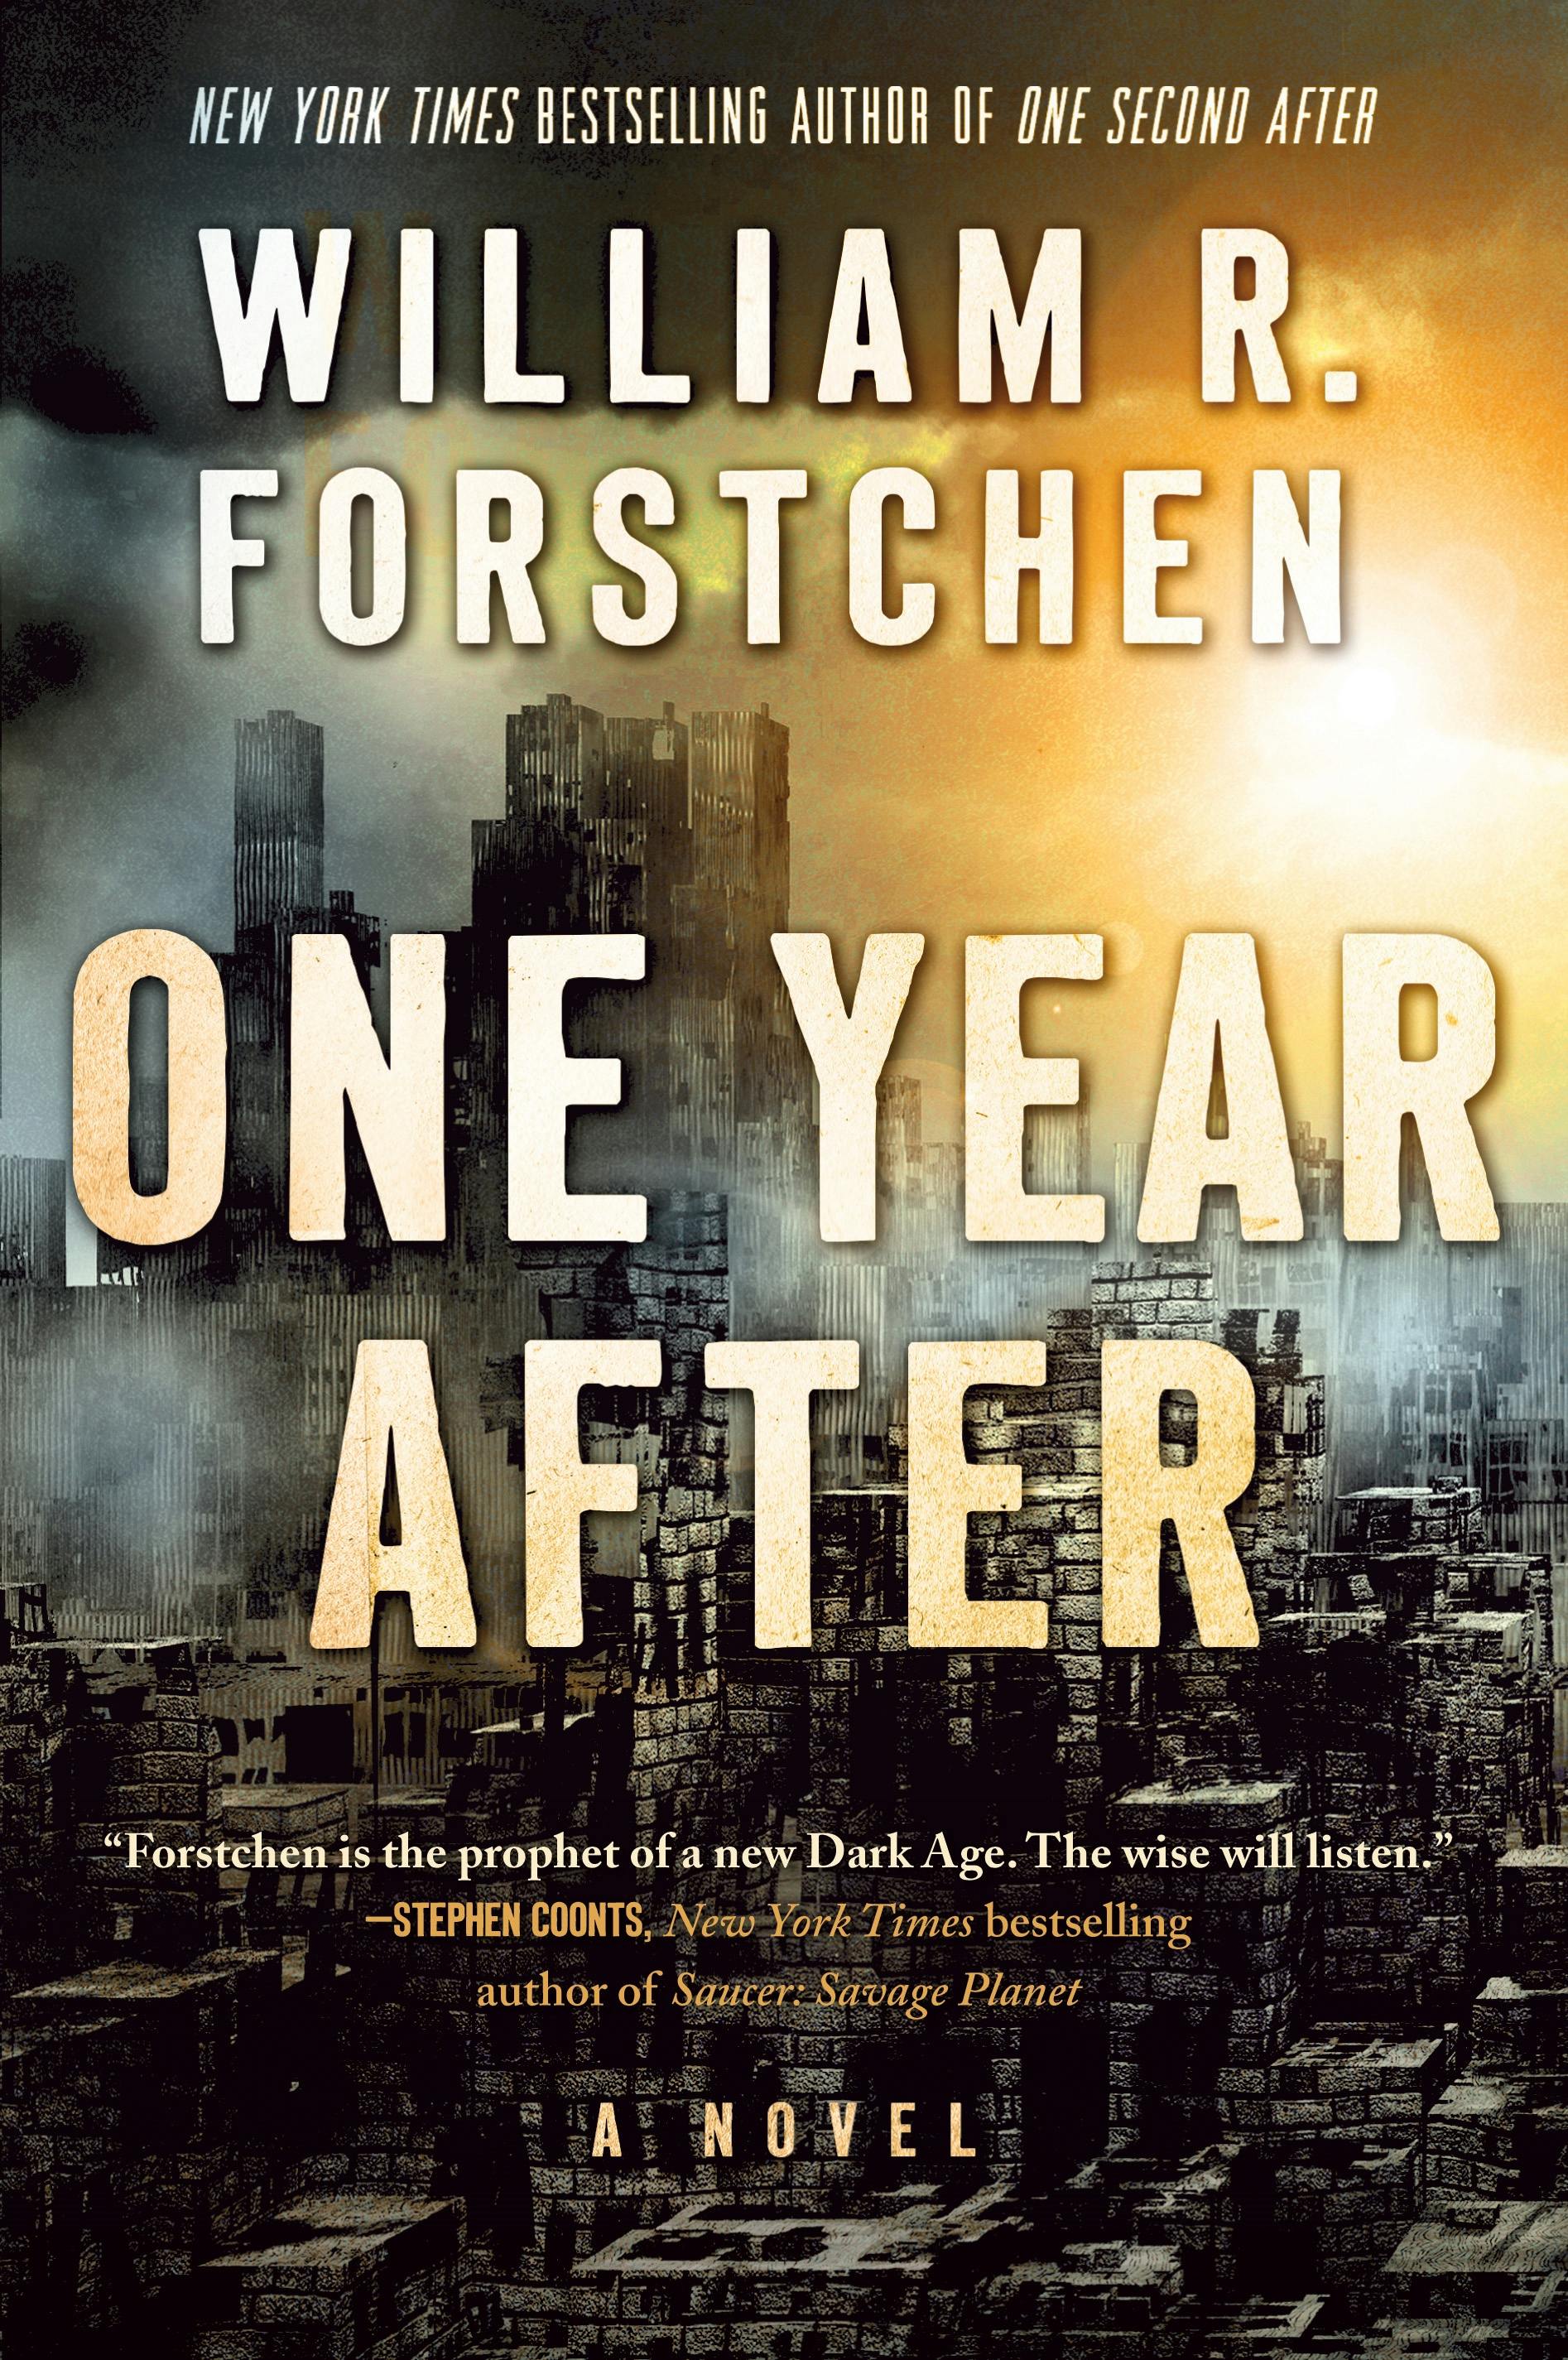 Cover for the book titled as: One Year After